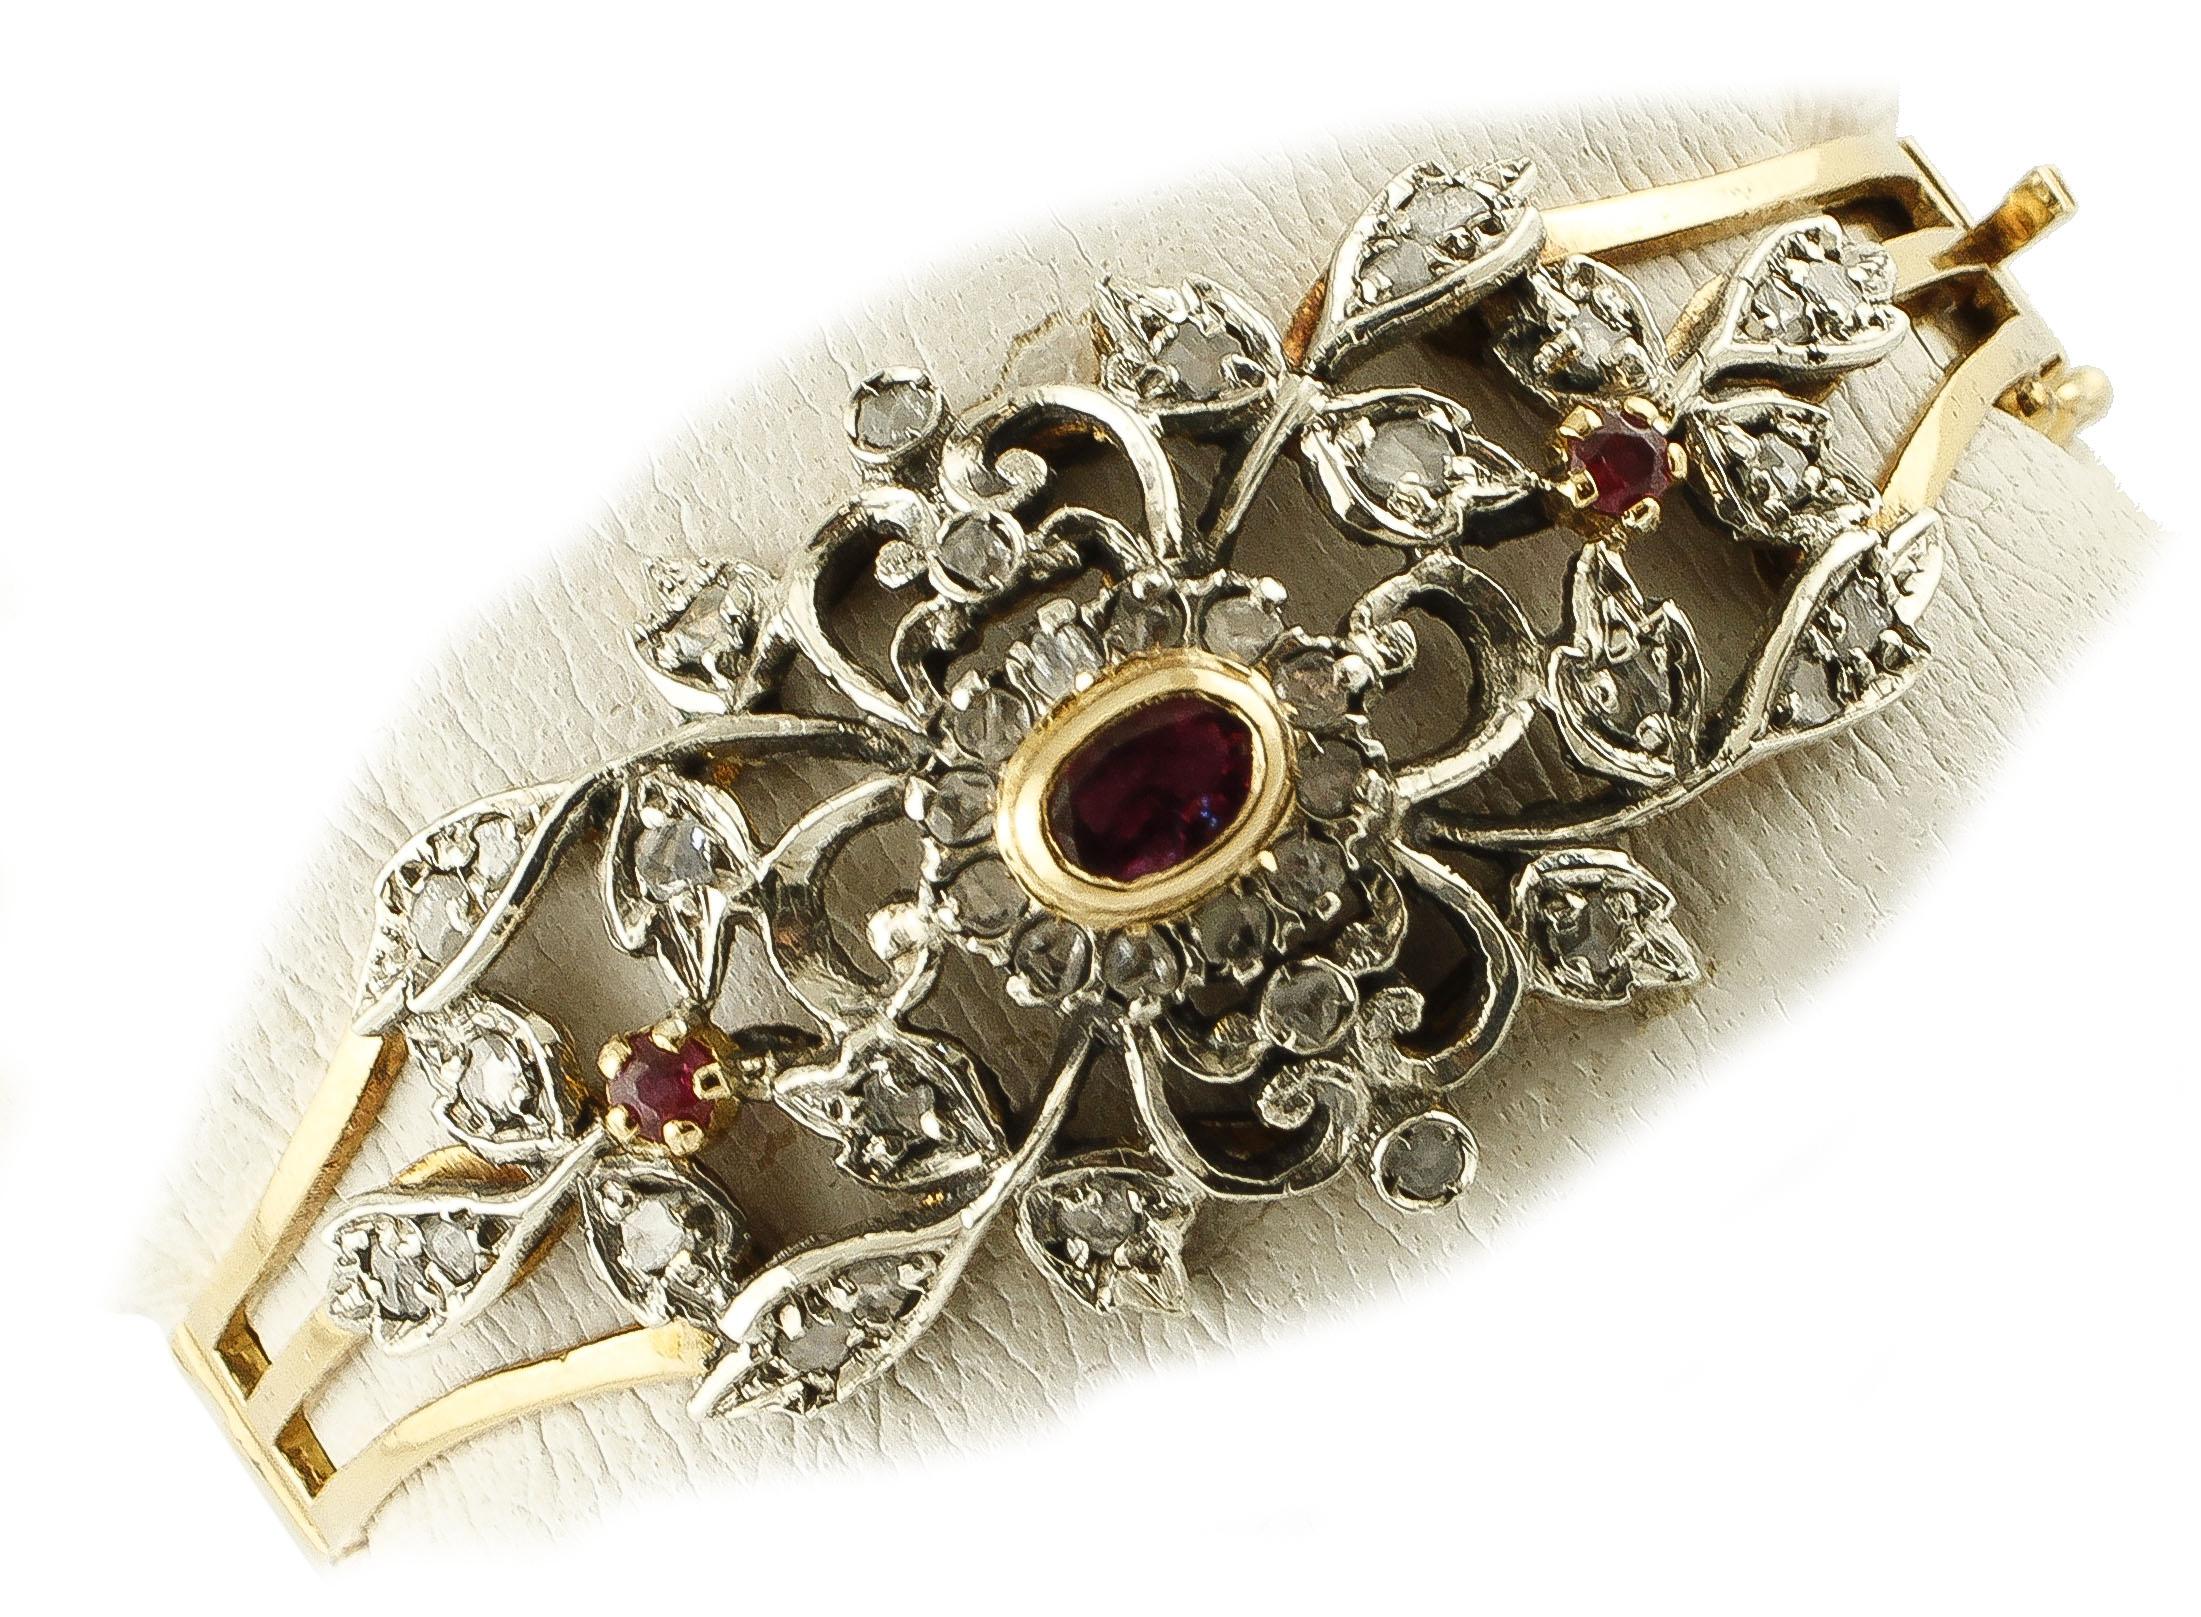 Vintage clamper bracelet in 18k yellow gold and silver, with flowery decorations in silver structure studded with diamonds and rubies.
The origin of this bracelet goes back to the 1950s, it was totally handmade by Italian master goldsmiths and it is